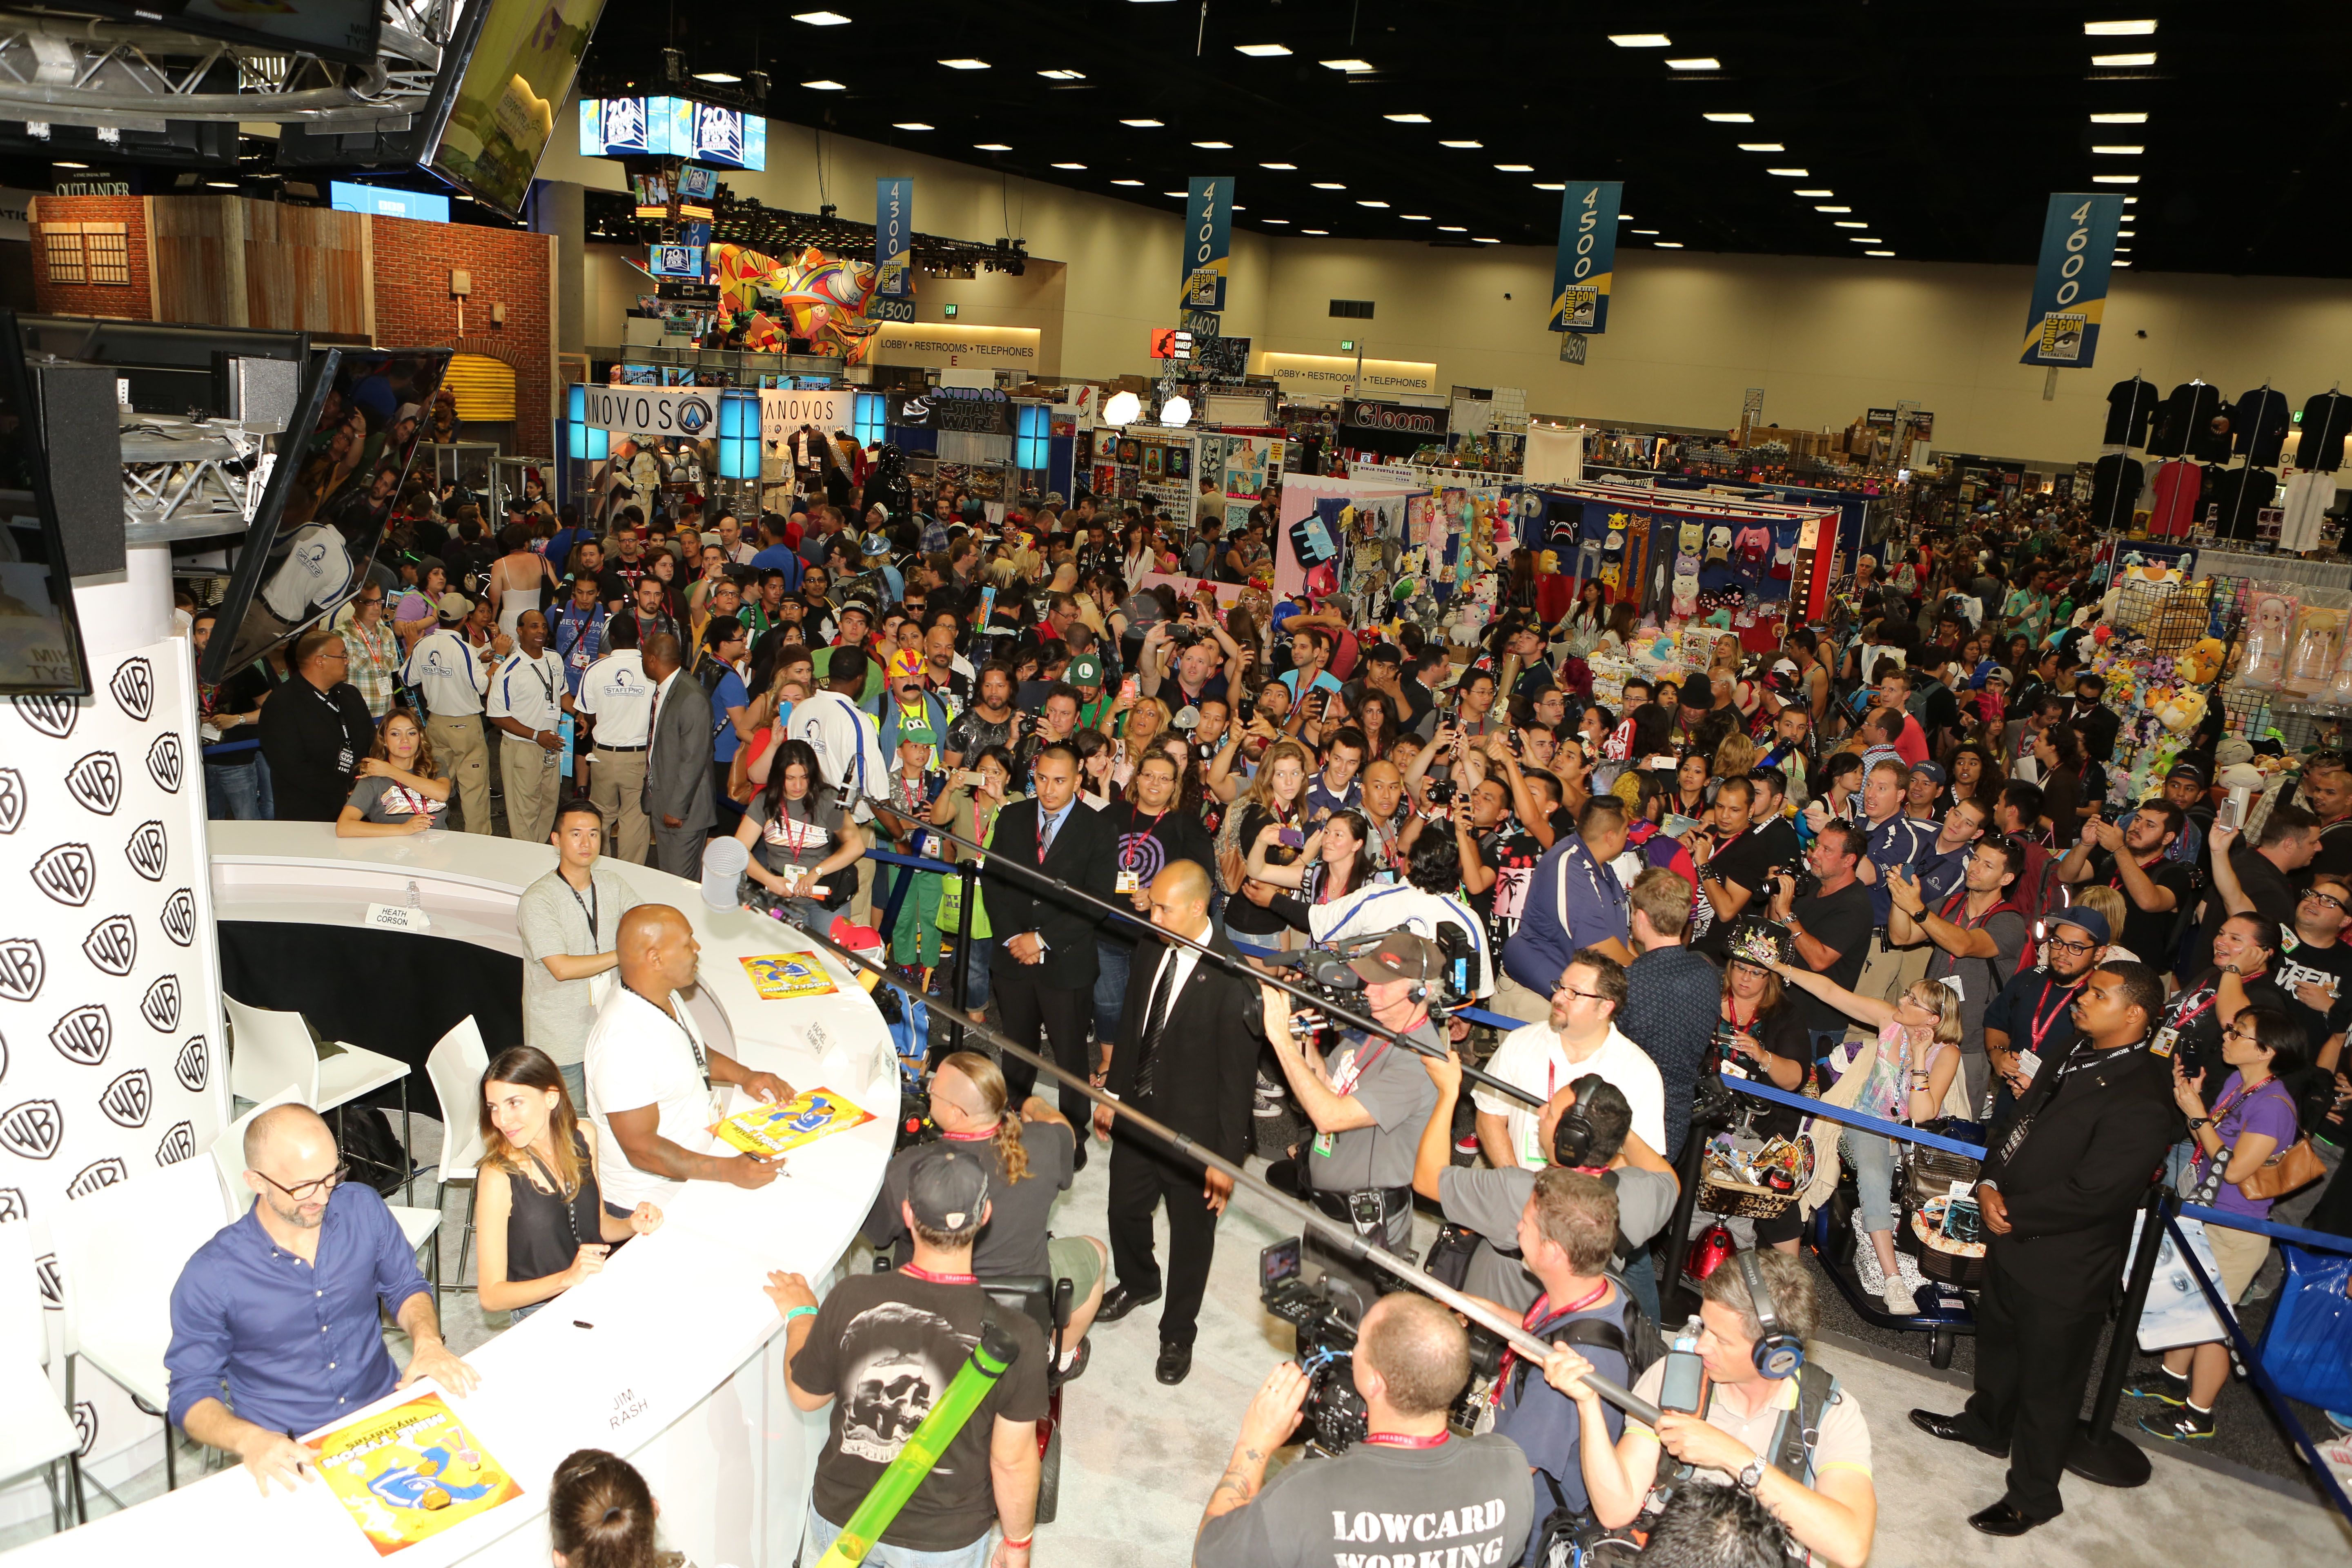 Mike Tyson Mysteries Crowd on hand to see him at San Diego Comic-Con.